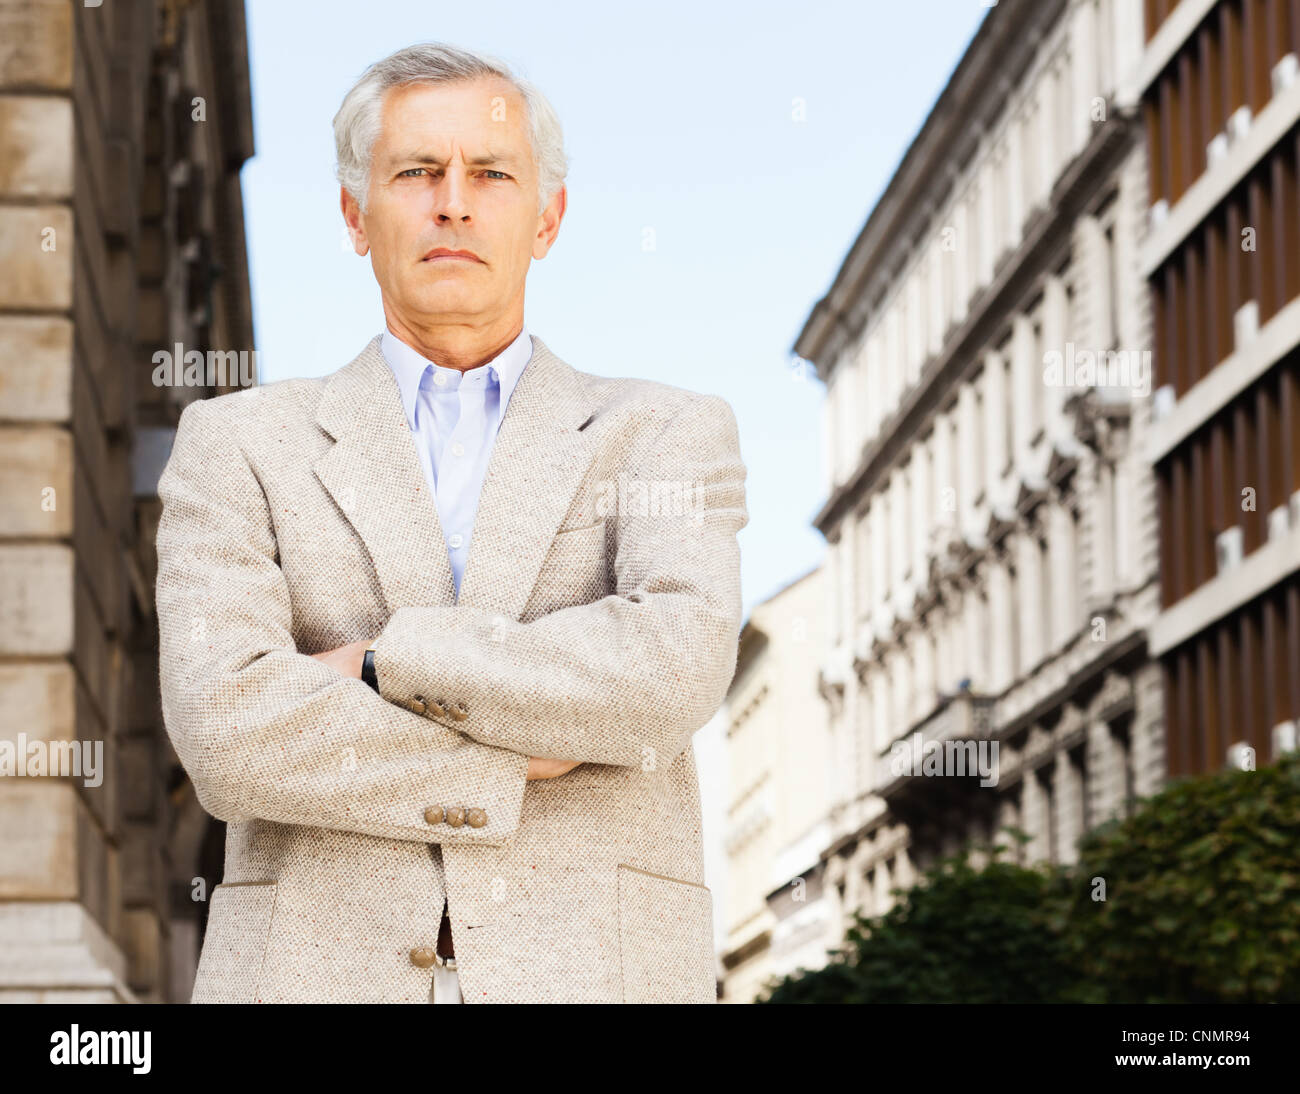 Businessman standing with arms crossed Banque D'Images